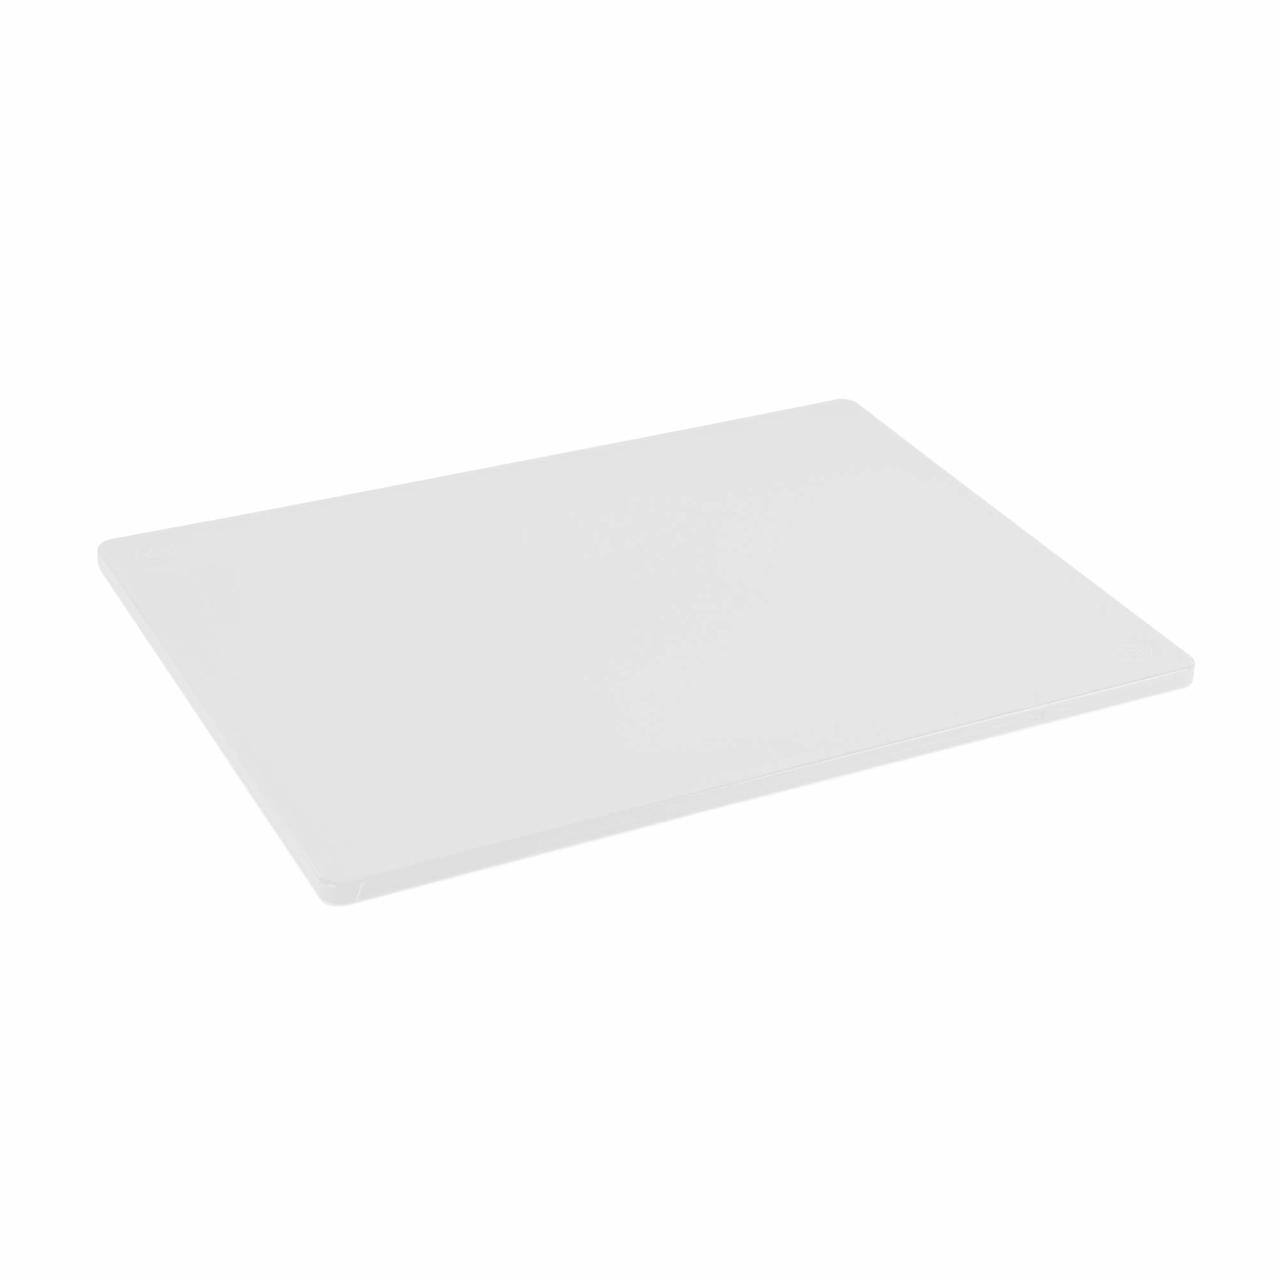 Commercial Yellow Plastic HDPE Cutting Board, NSF Certified - 15 x 20 x 1/2